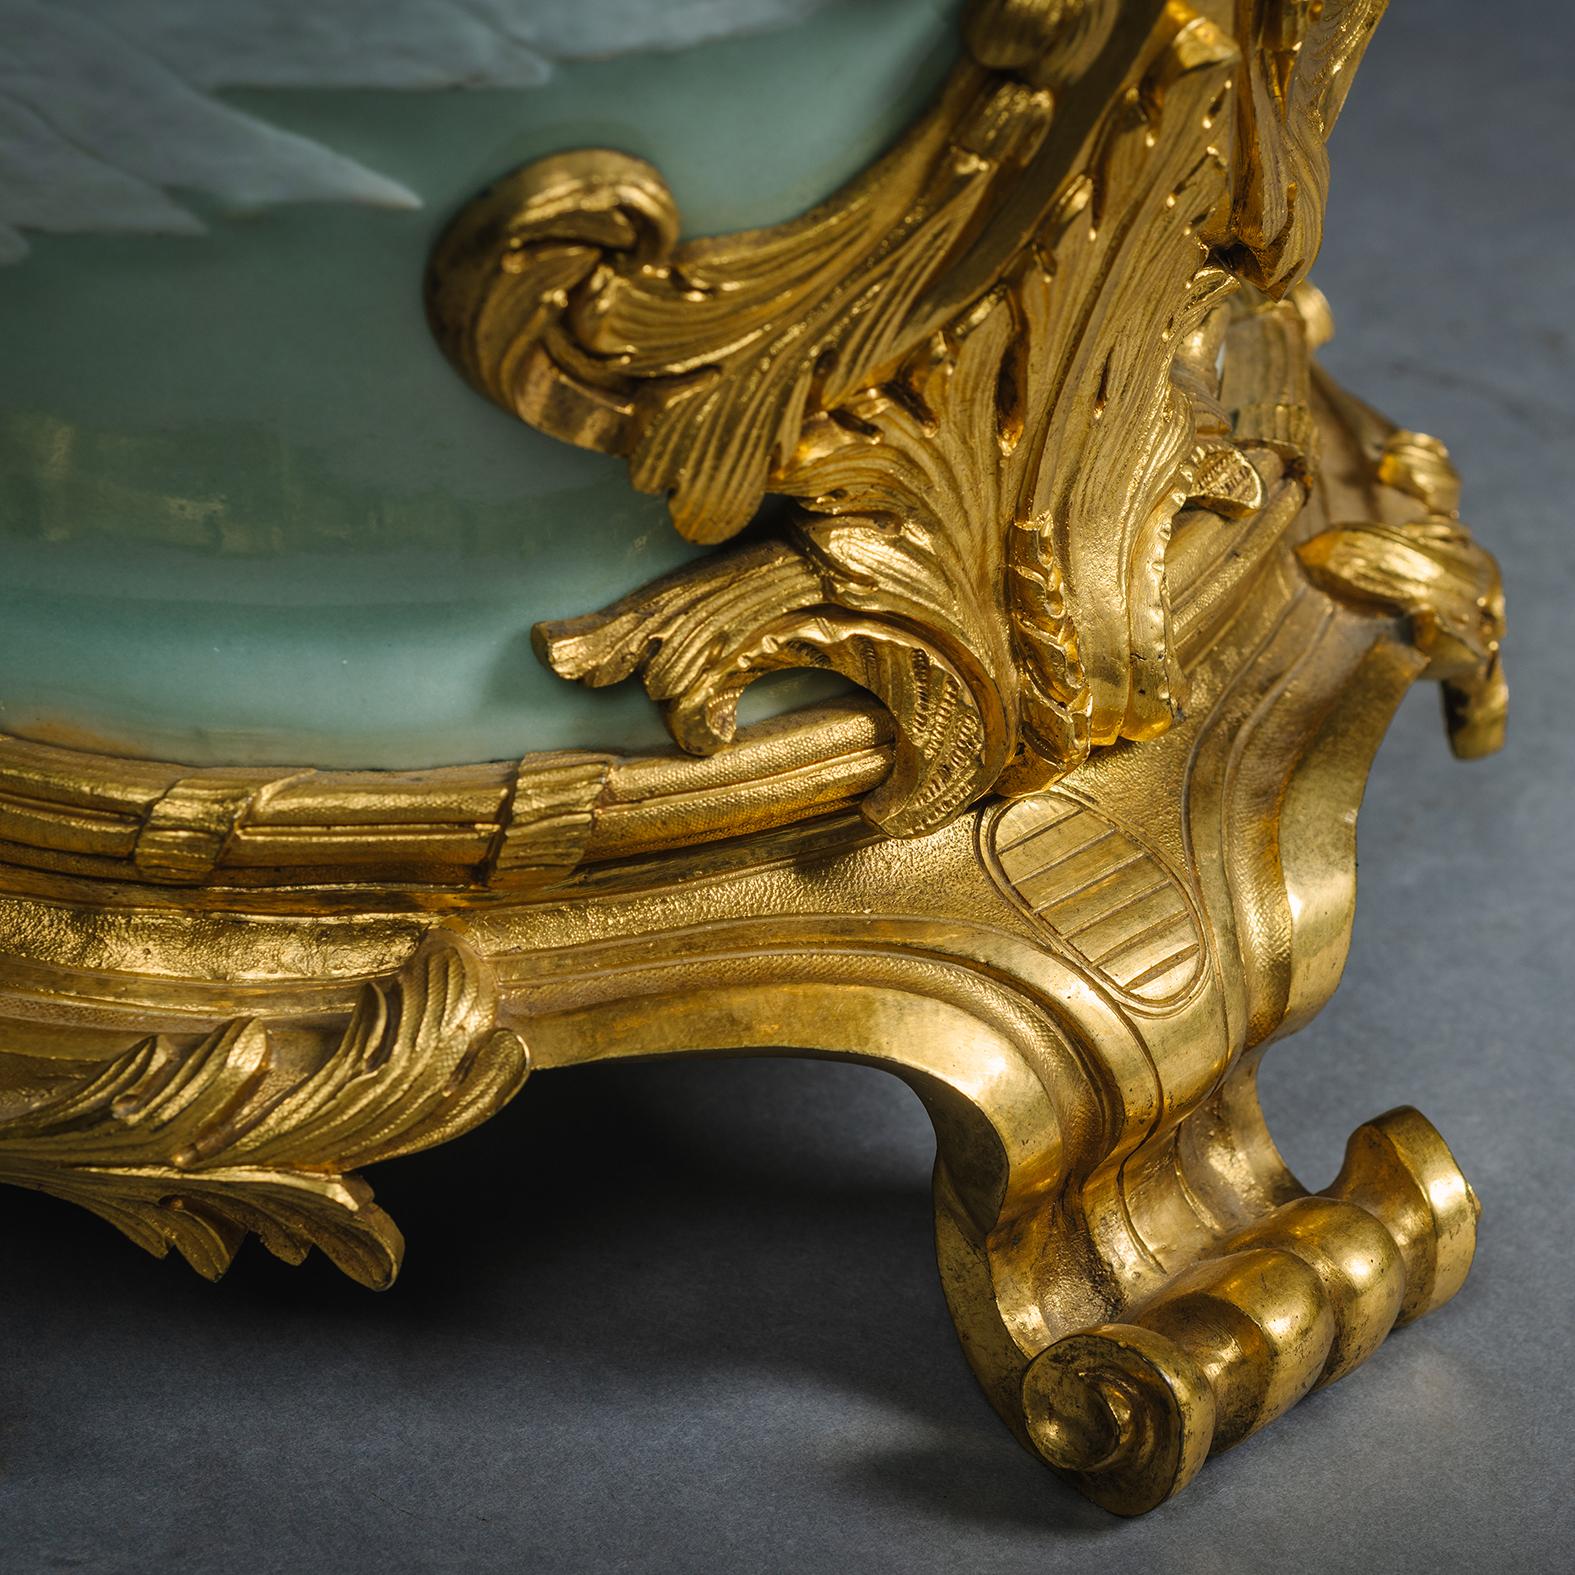 19th Century Pair of Gilt-Bronze Mounted Chinese Celadon-Ground Vases For Sale